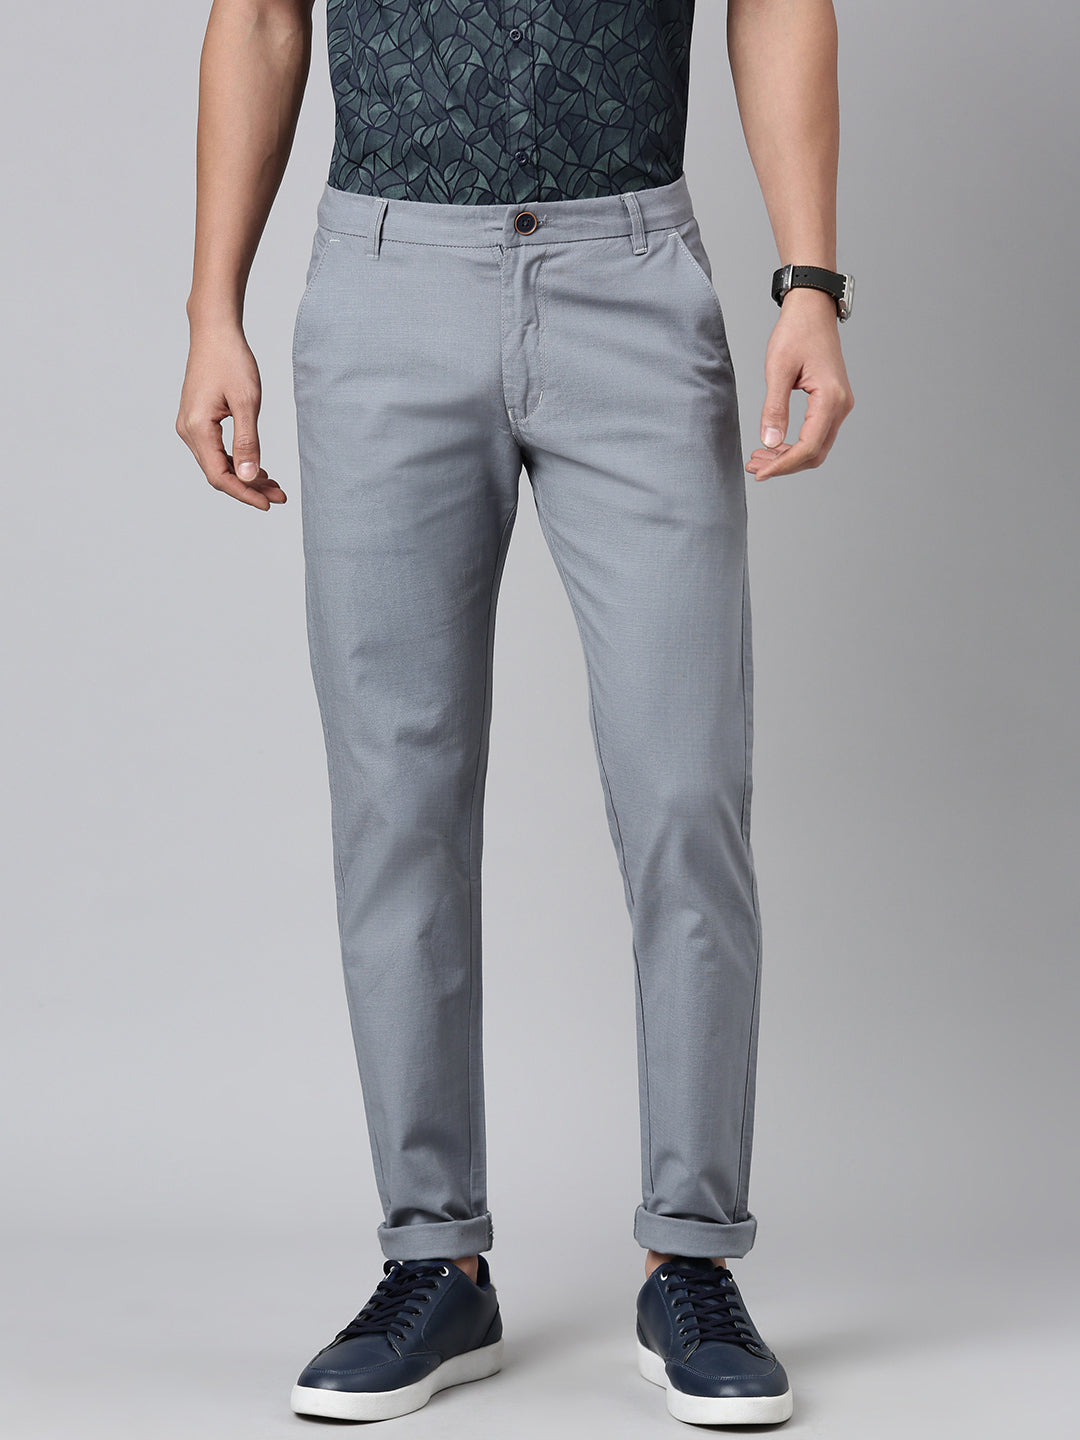 Majestic Man Regular Fit Solid Casual Trouser - Grey